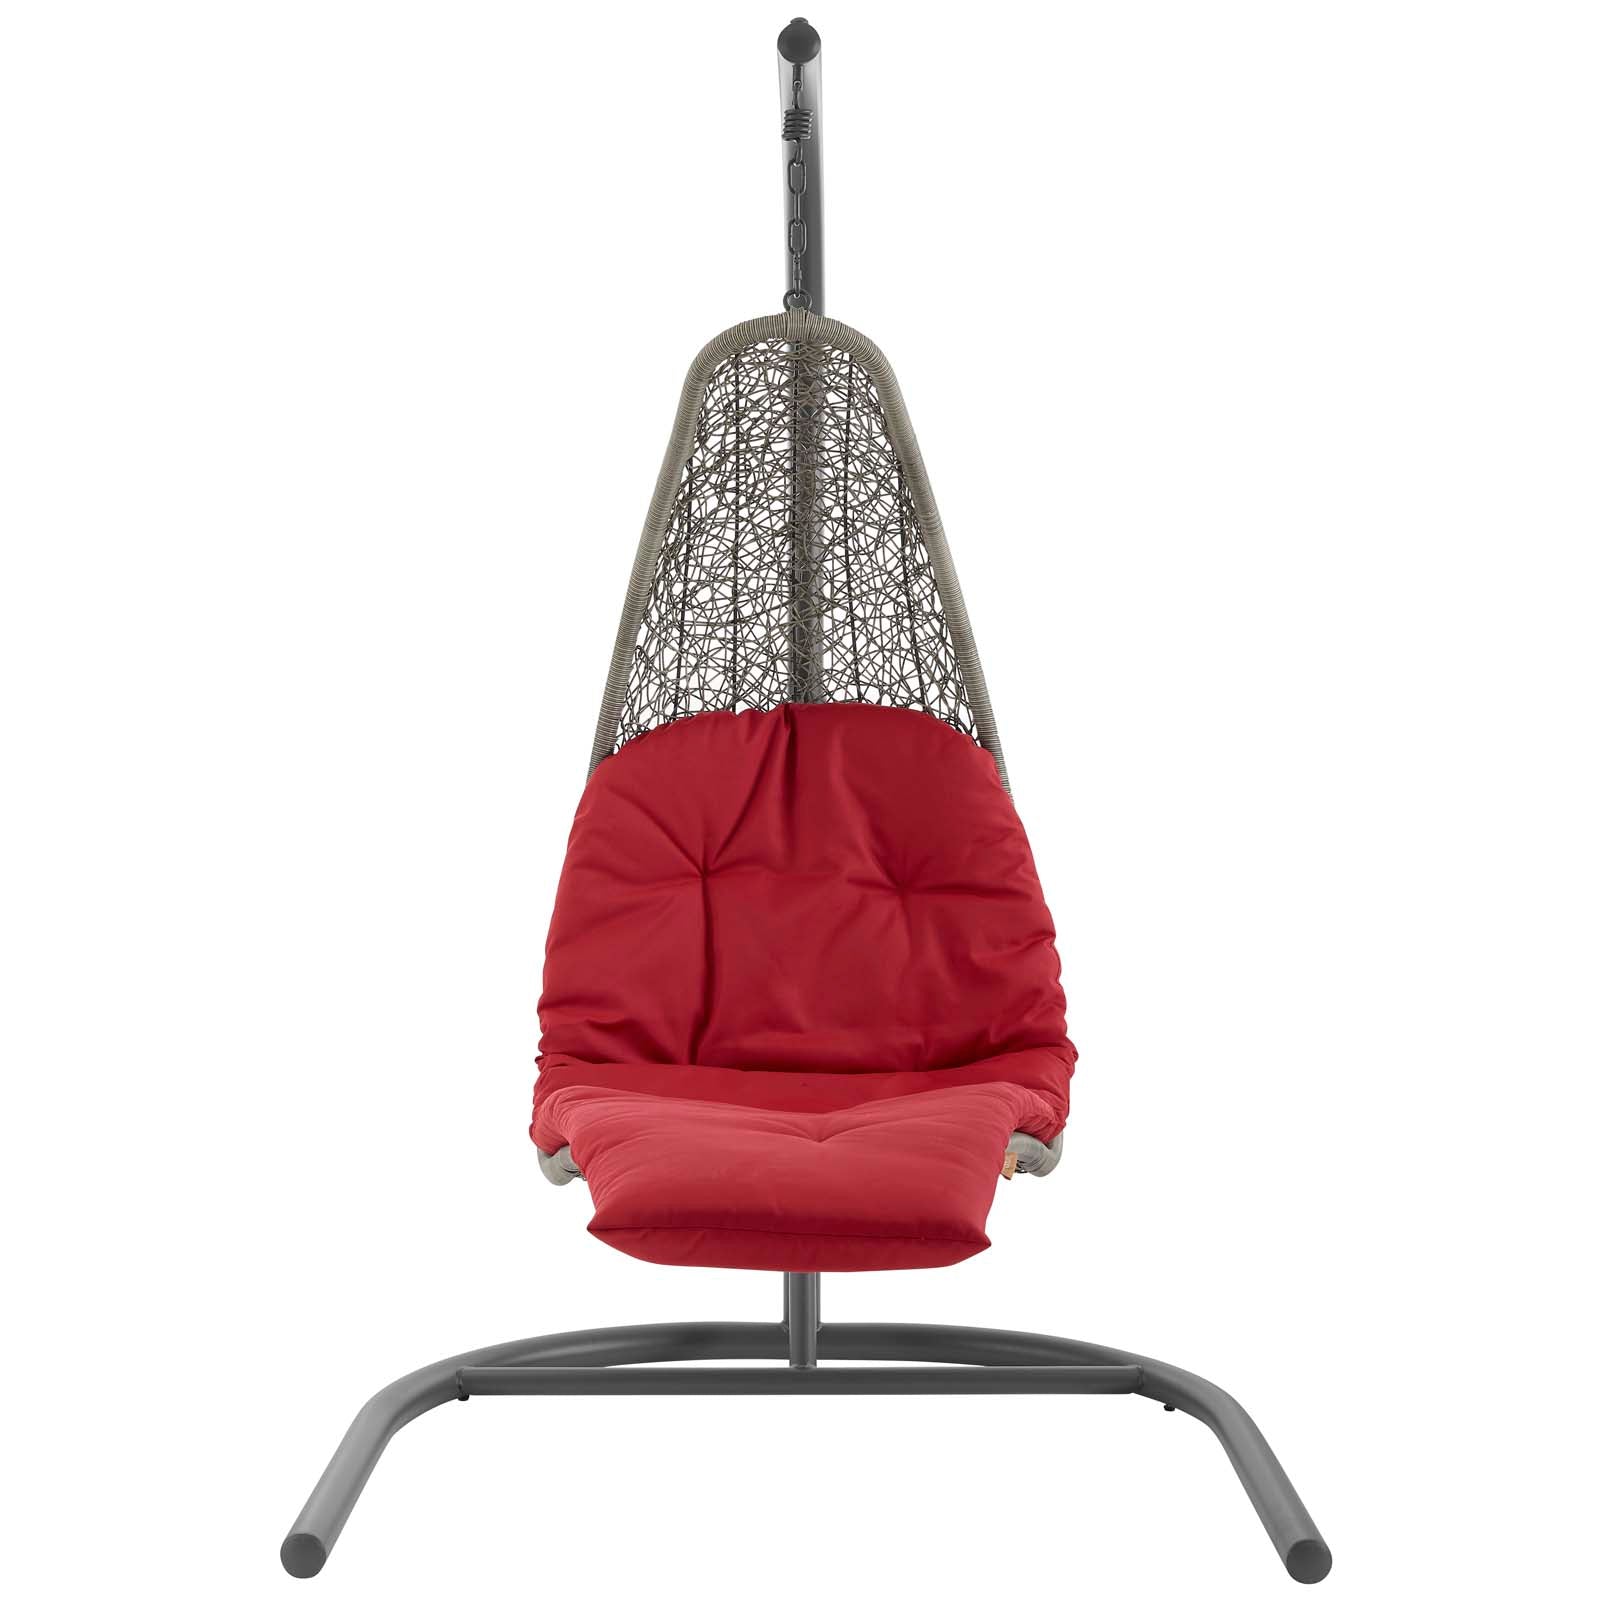 Modway Outdoor Swings - Landscape Hanging Chaise Lounge Outdoor Patio Swing Chair Light Gray Red